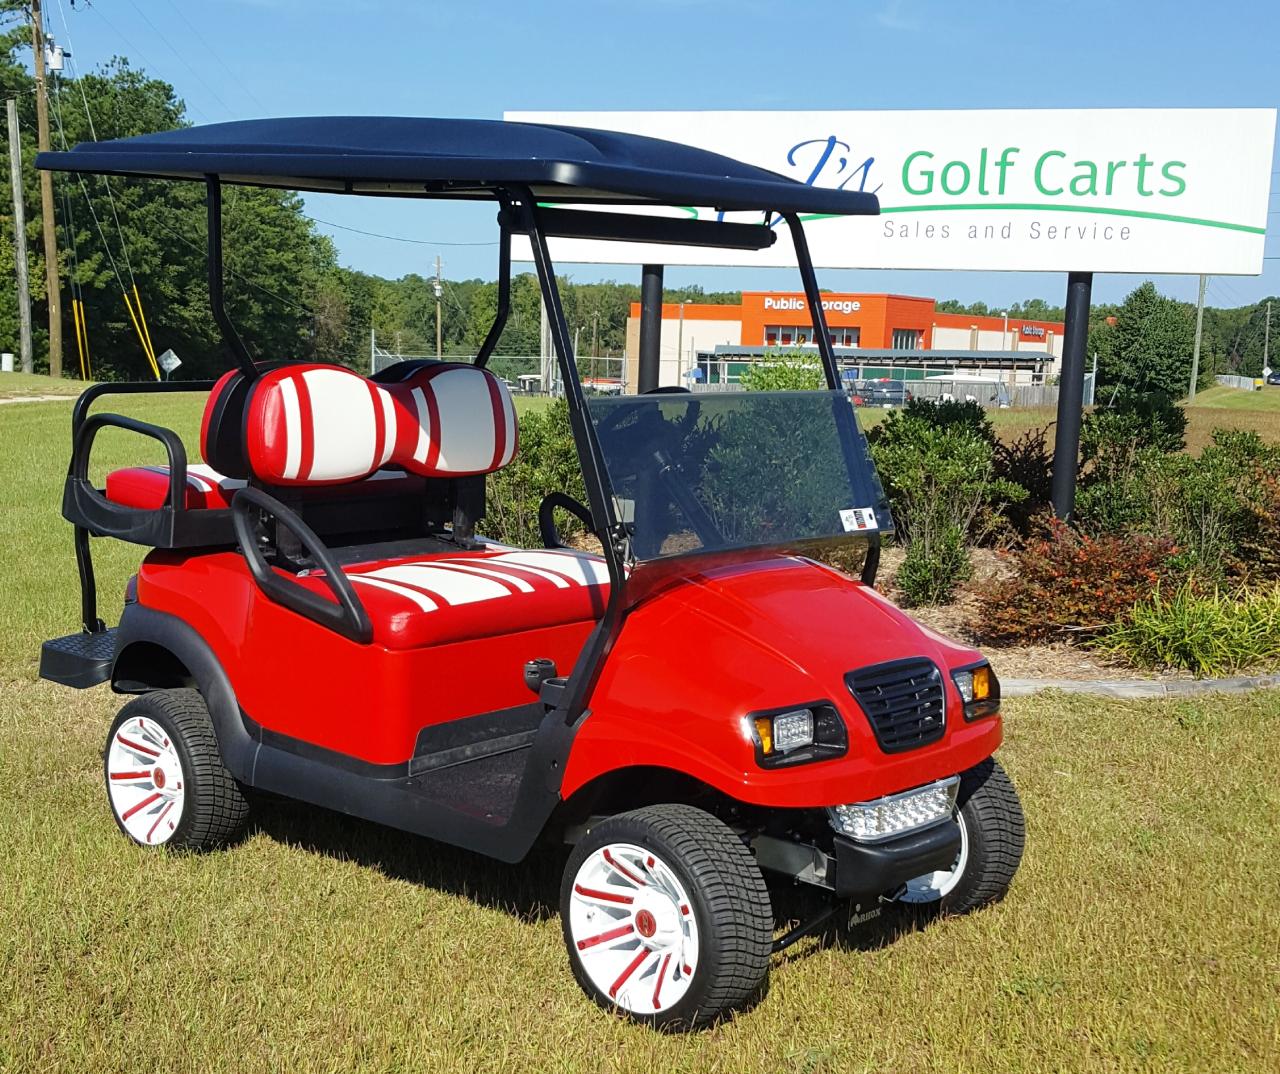 Find Your Dream Ride: Used Golf Carts for Sale by Owner in Racine, Wisconsin